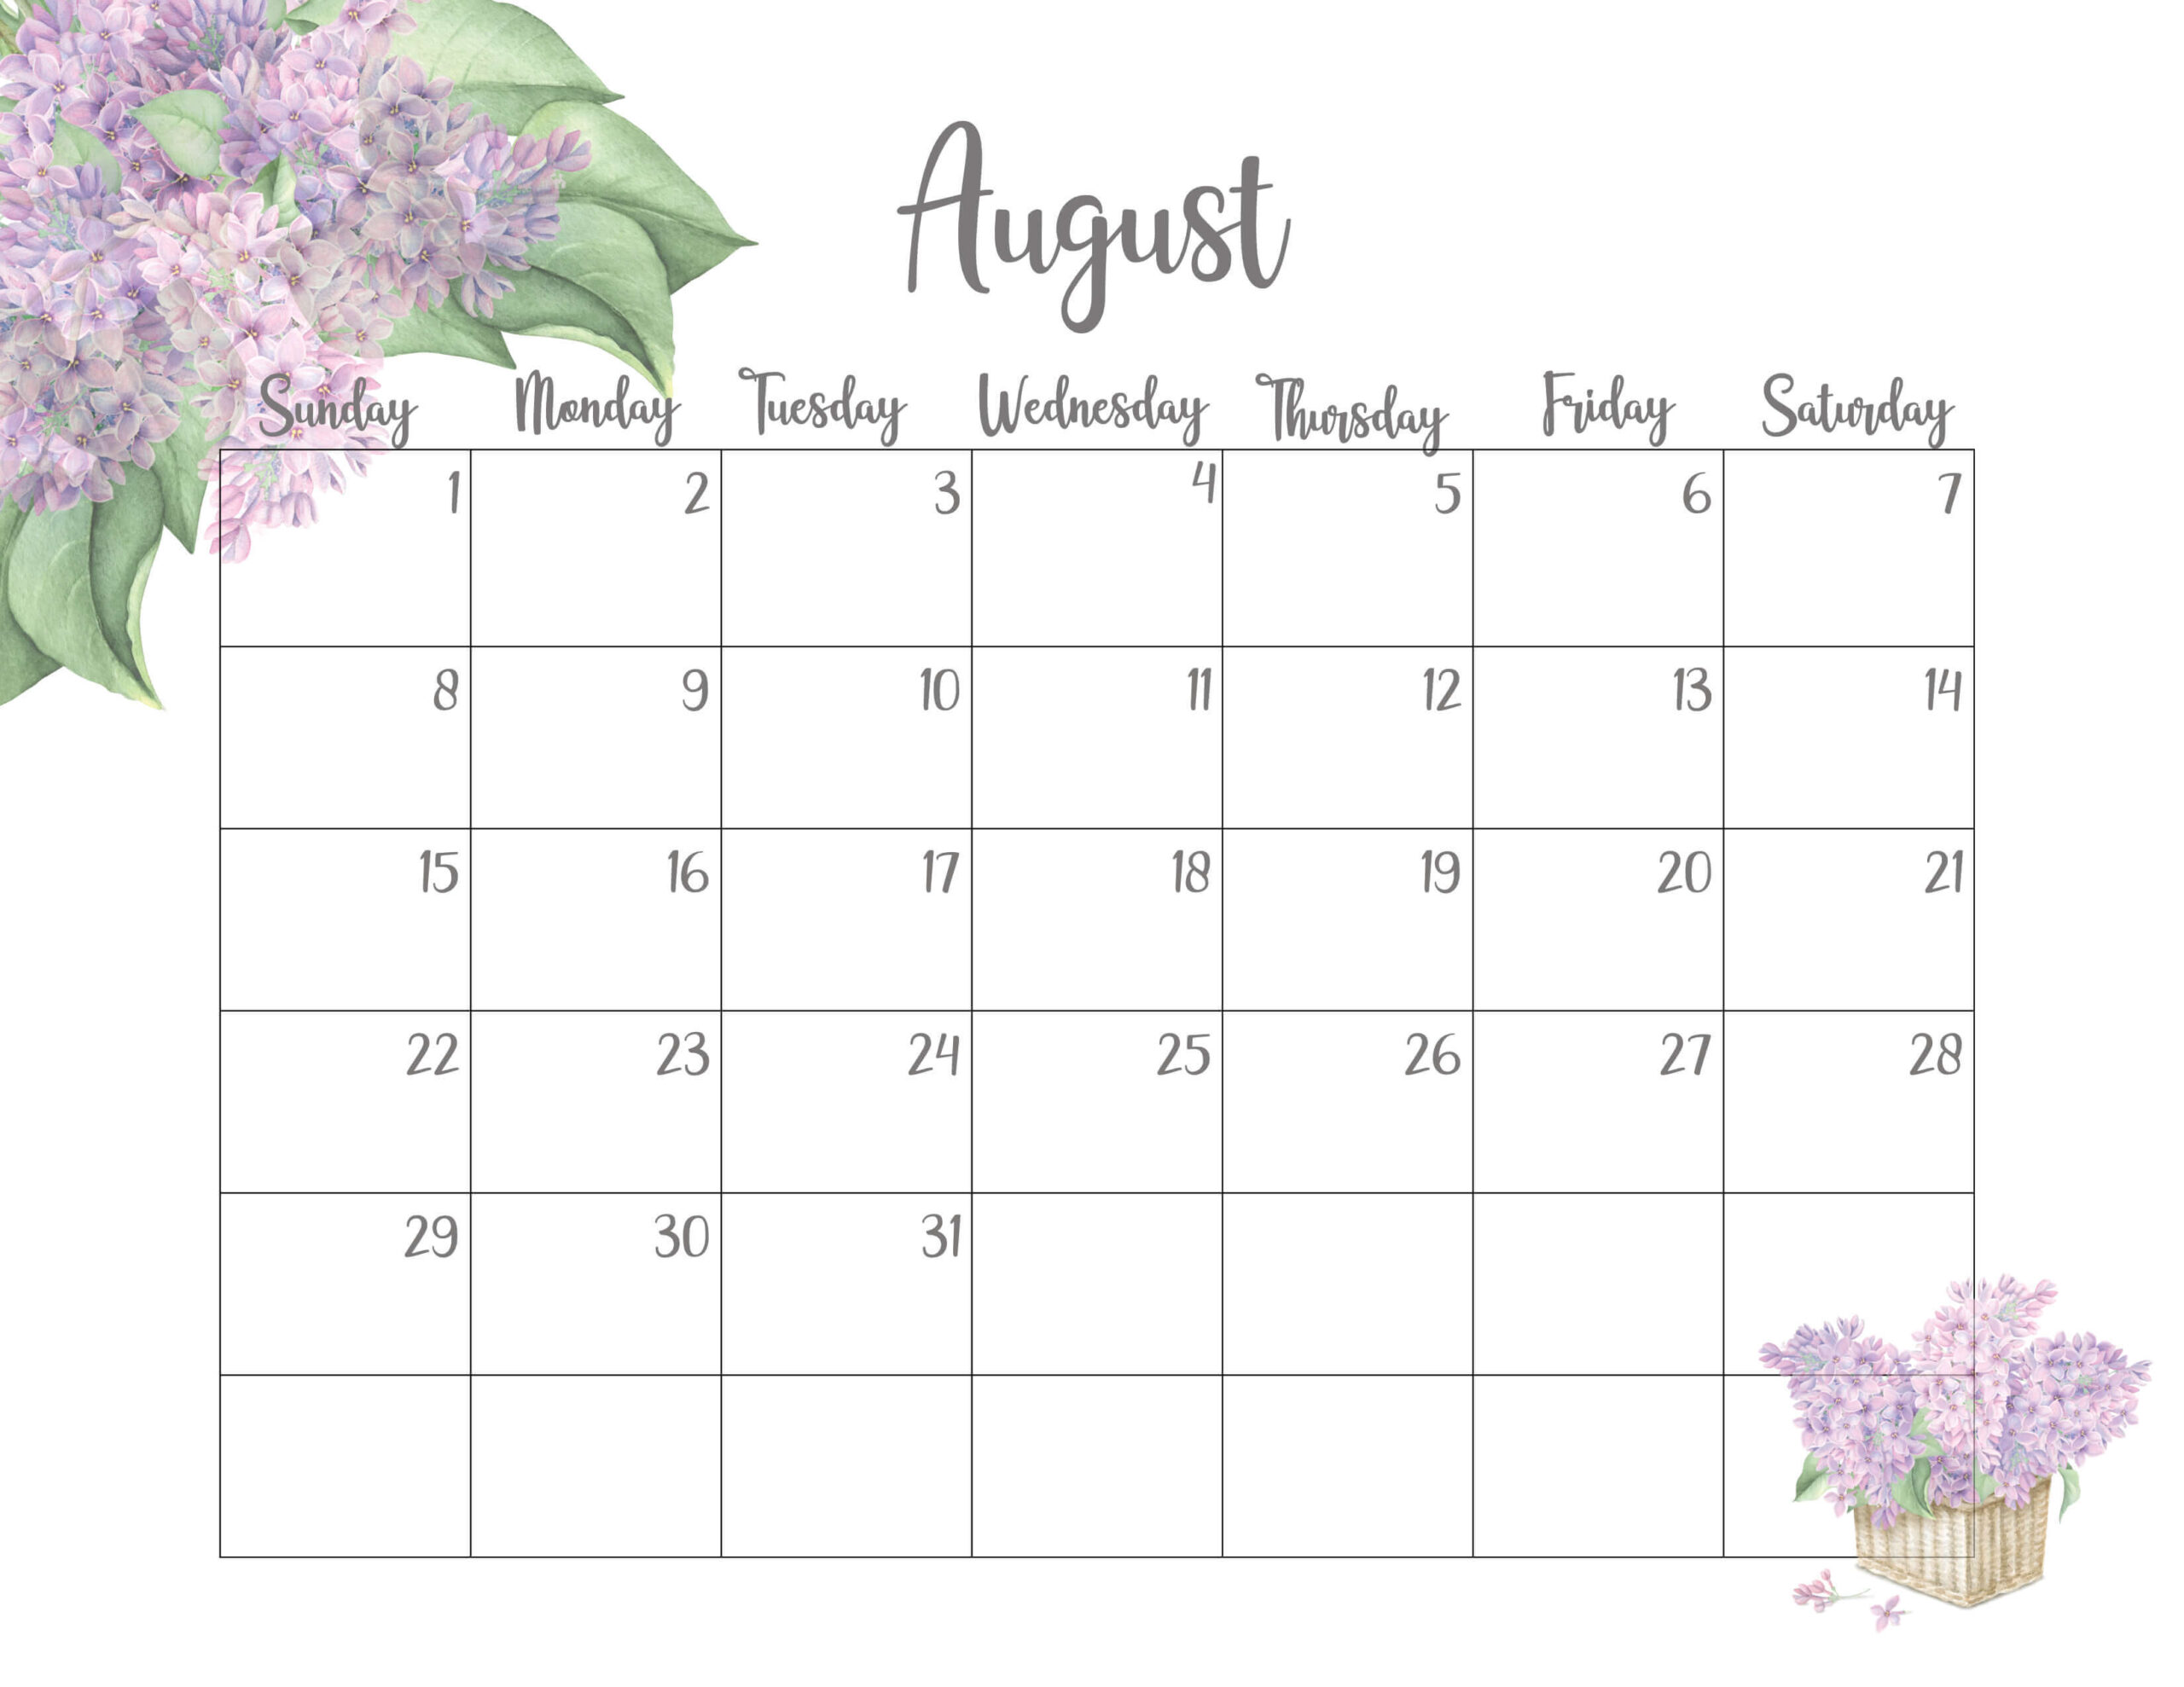 Take Calendar Page For August 2022